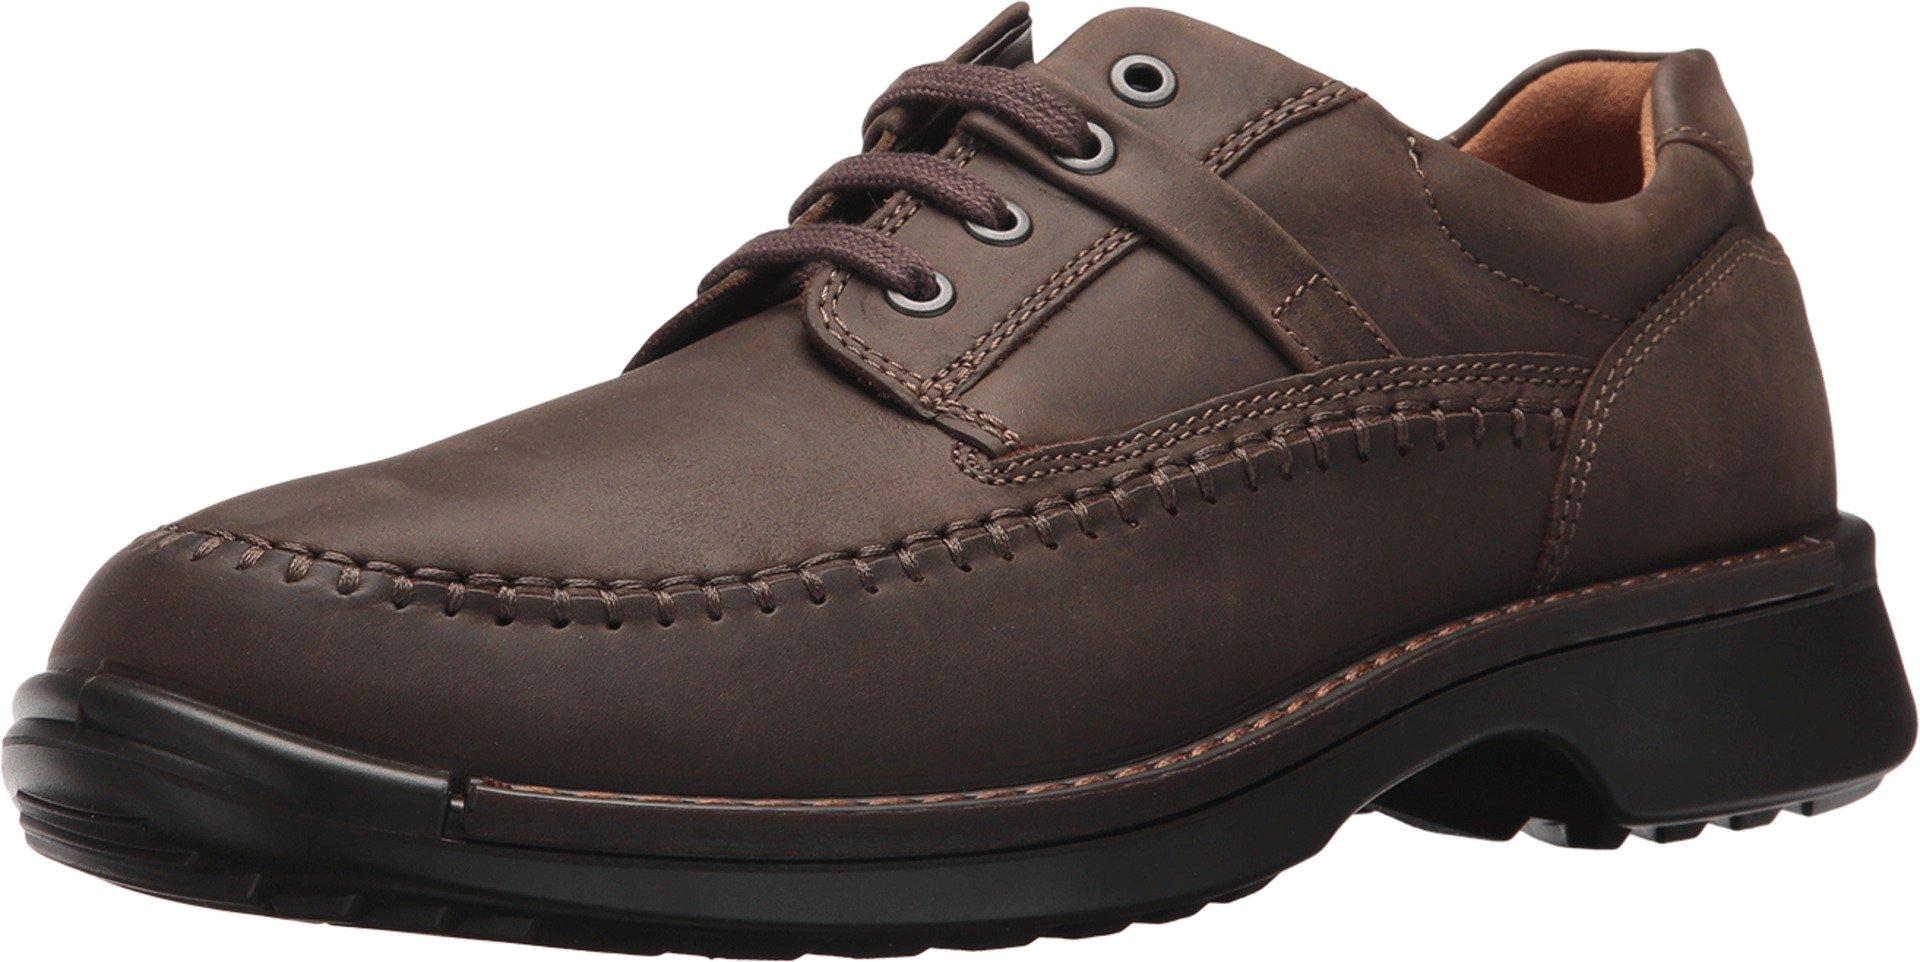 Ecco Leather Fusion Ii Moc Toe Tie in Coffee (Brown) for Men - Lyst